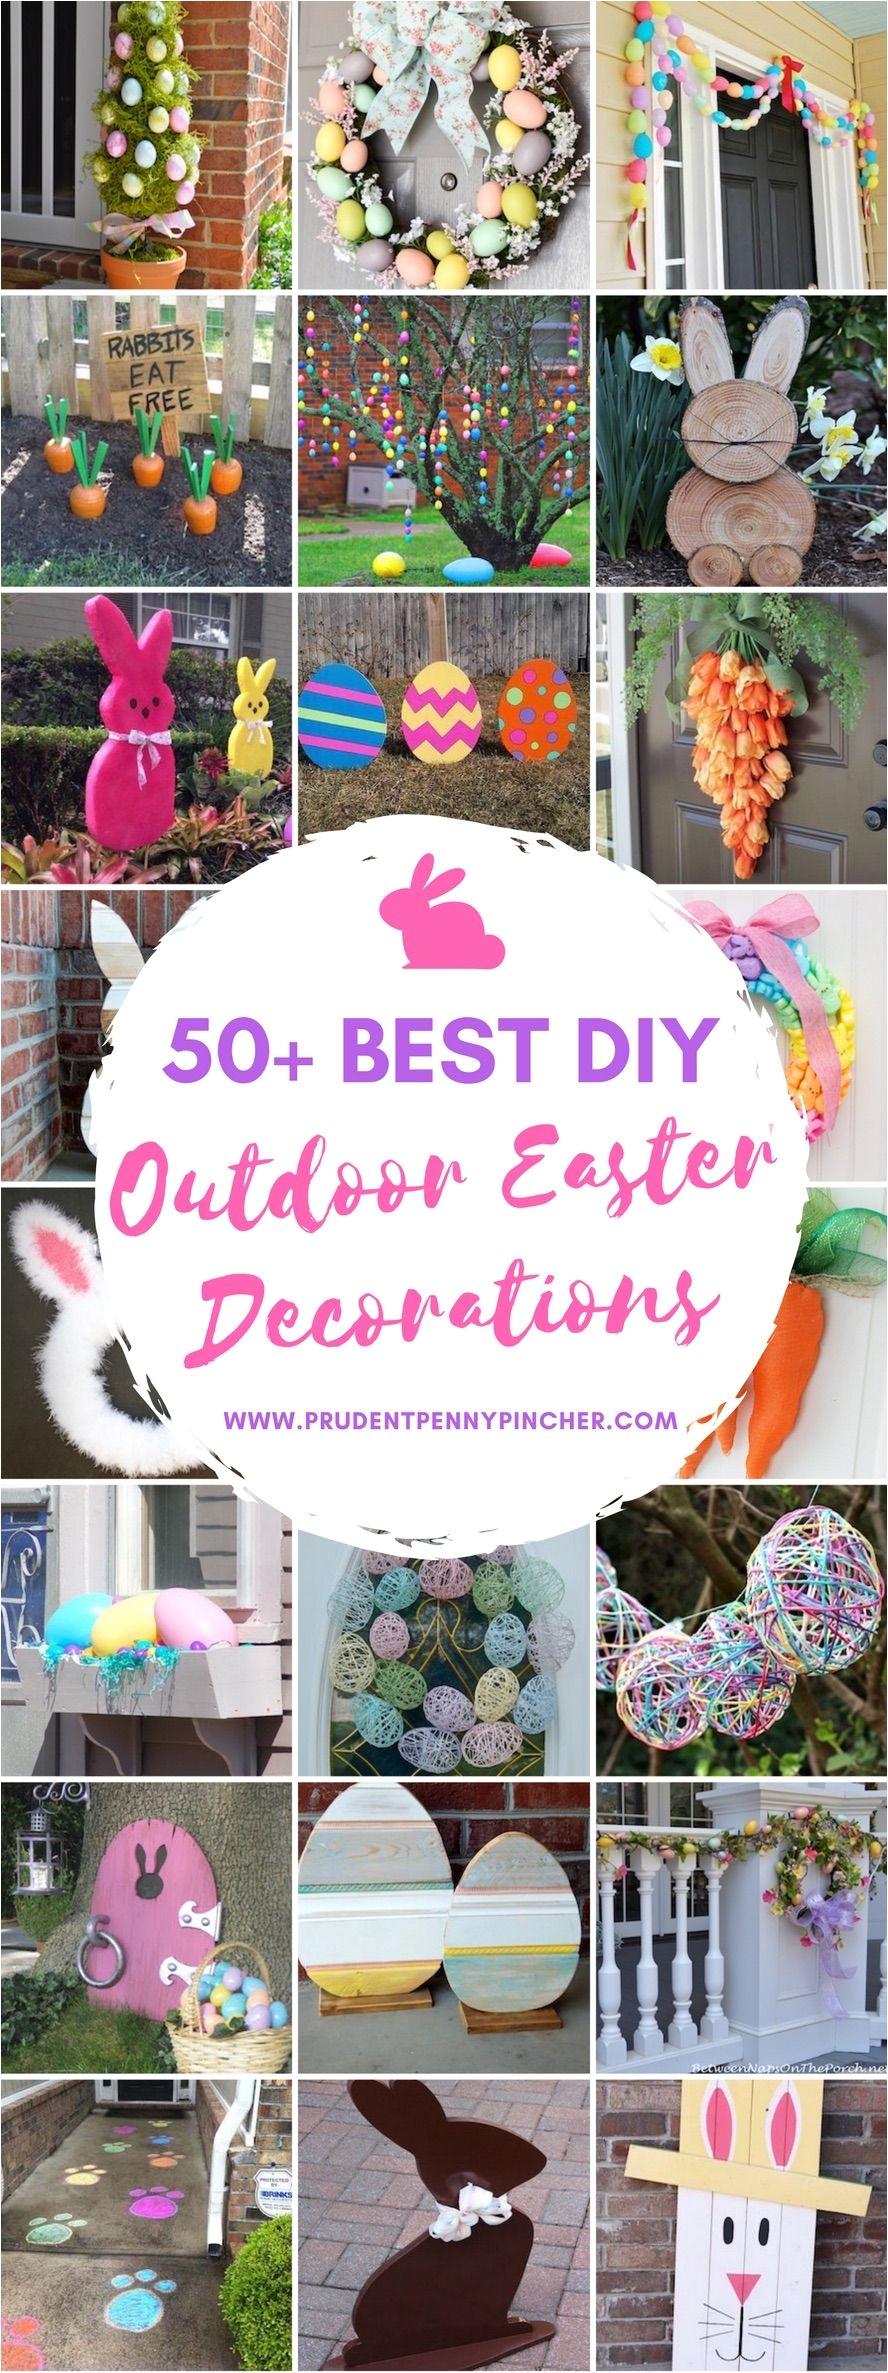 Diy Easter Decorations for Outside What An Awesome Idea to Decorate the Yard for Easter 973thedawg Com